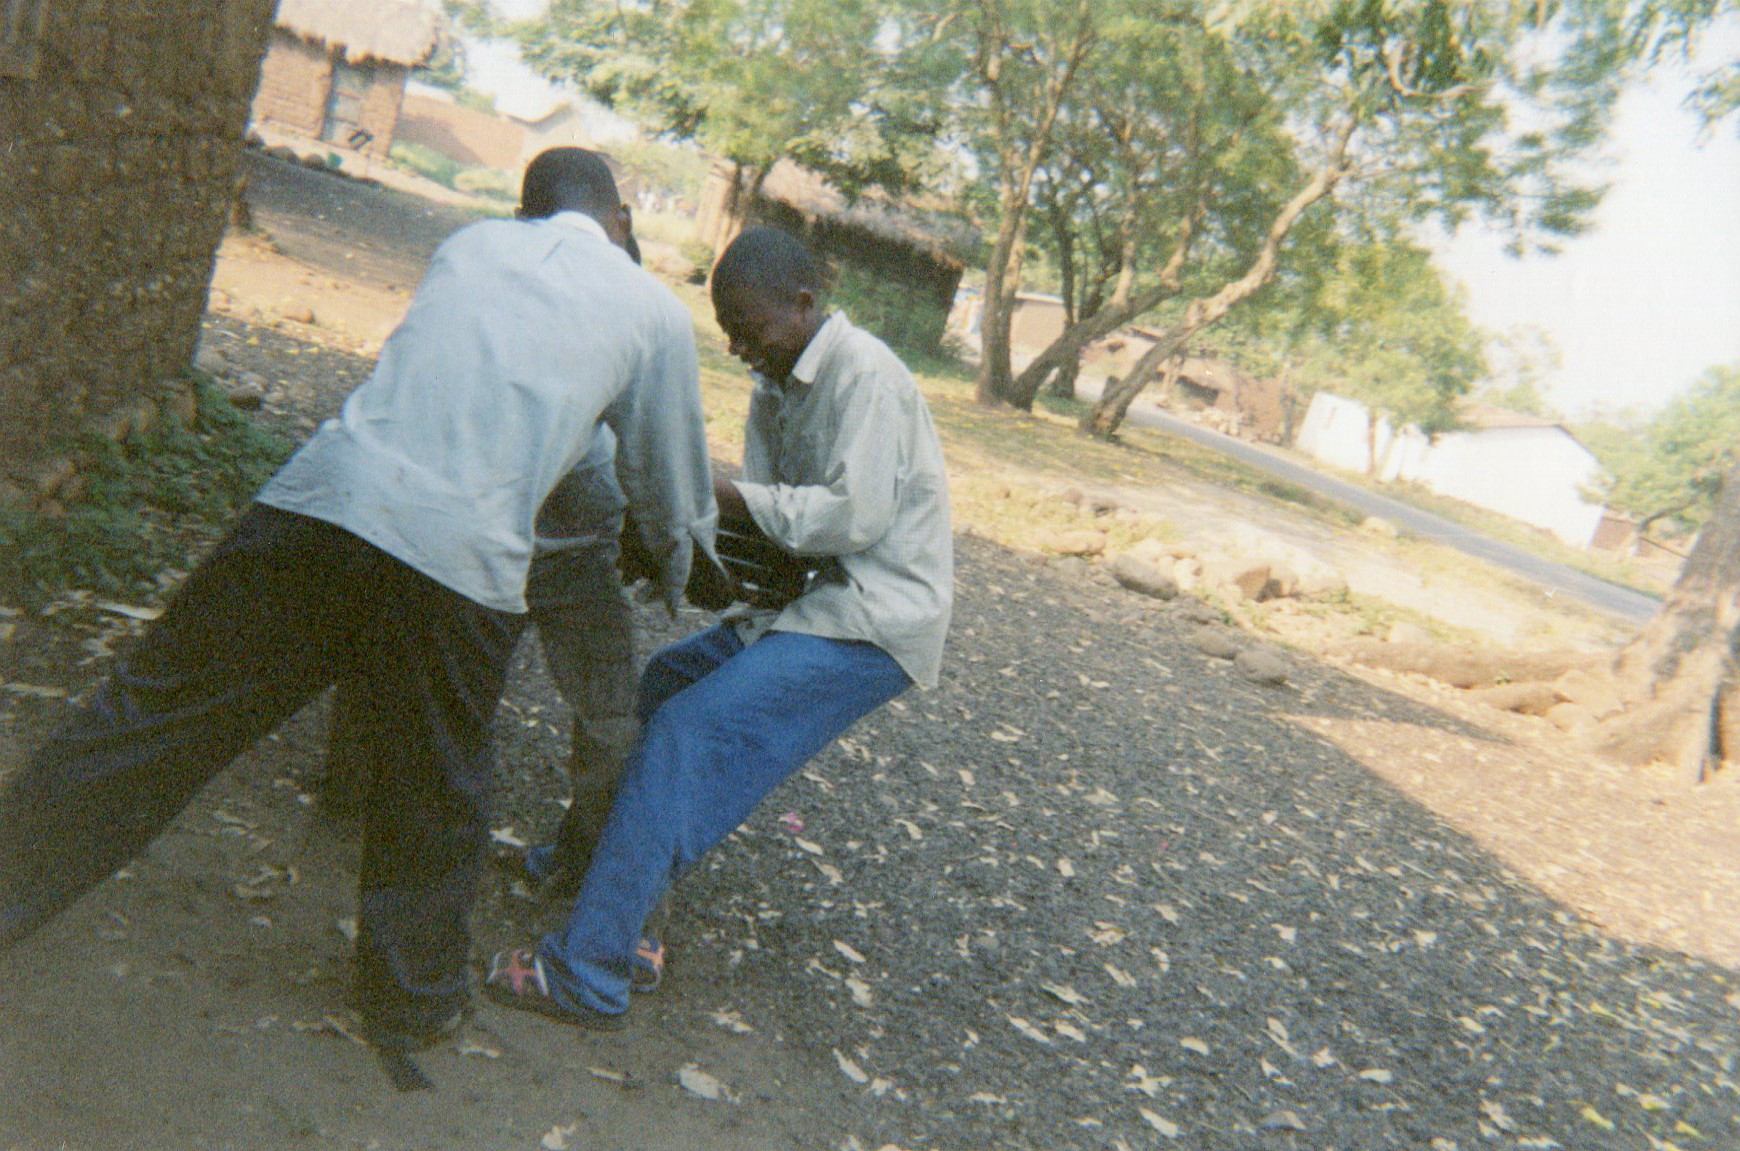  This photo shows the inadequacies of the reintegration and reinsertion kit for tailoring — these three young people are in a dispute regarding a sewing machine included in a reinsertion kit. 